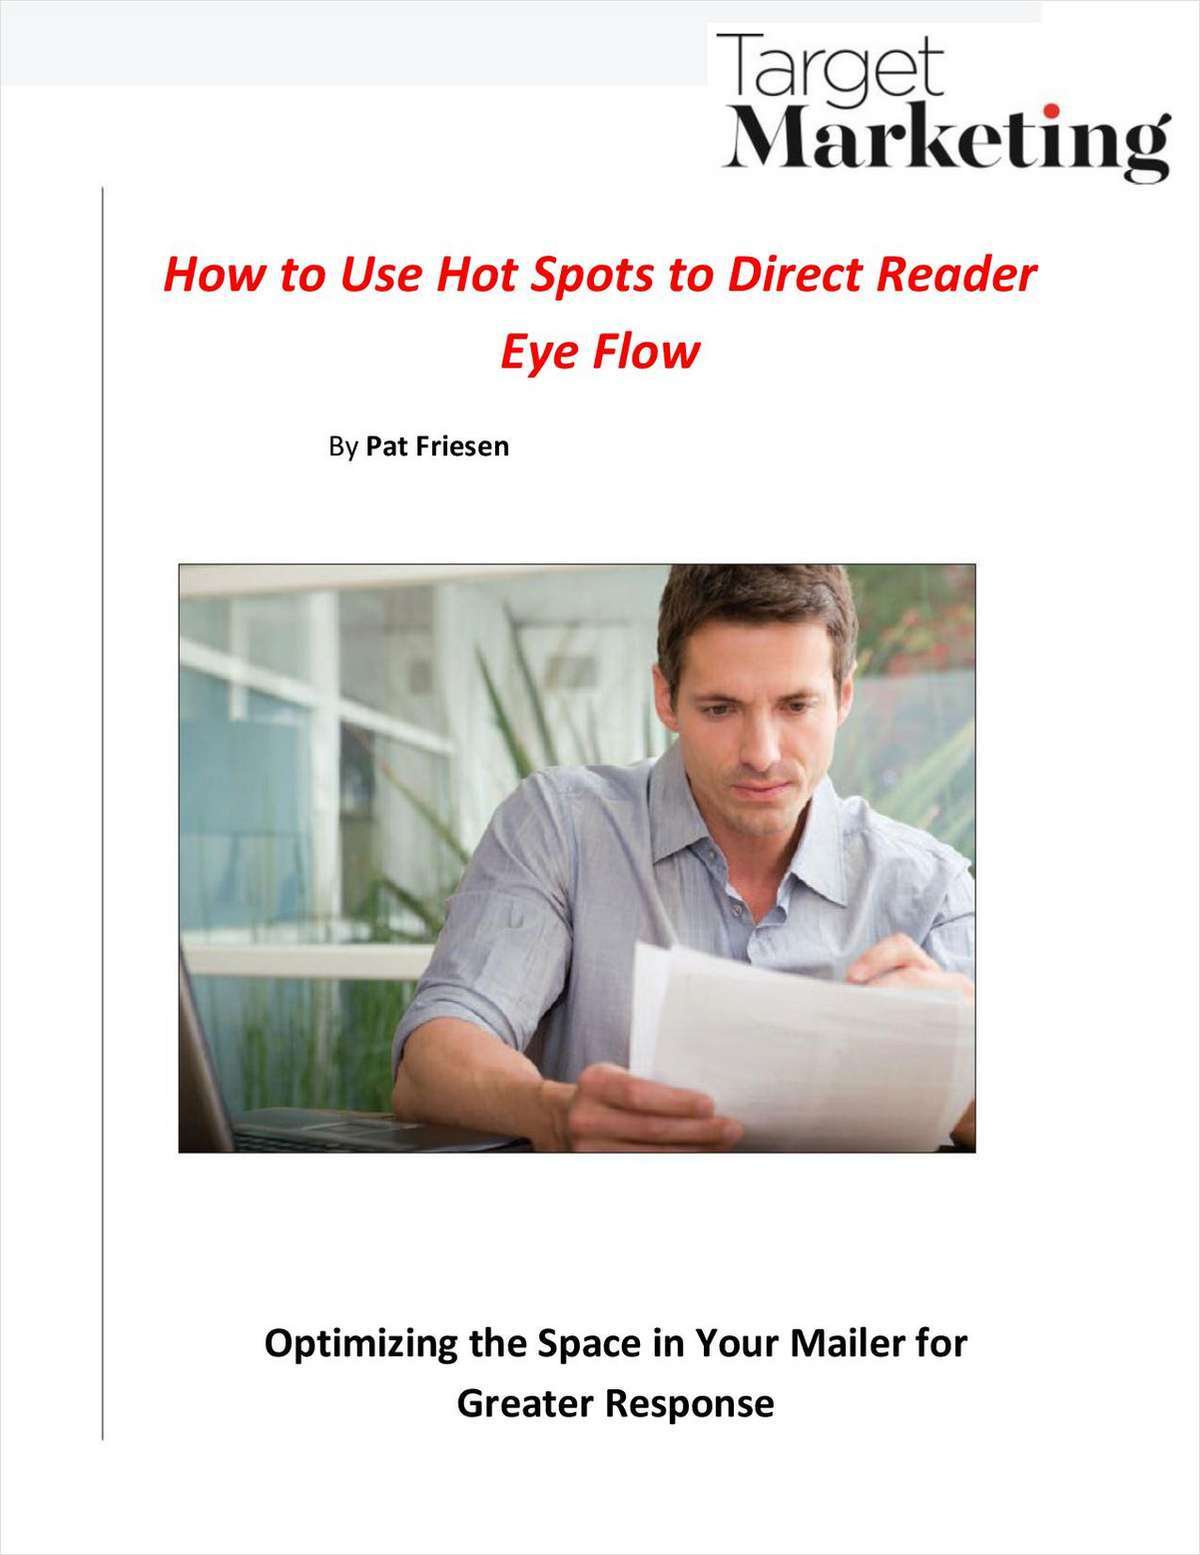 How to Use Hot Spots to Direct Reader Eye Flow